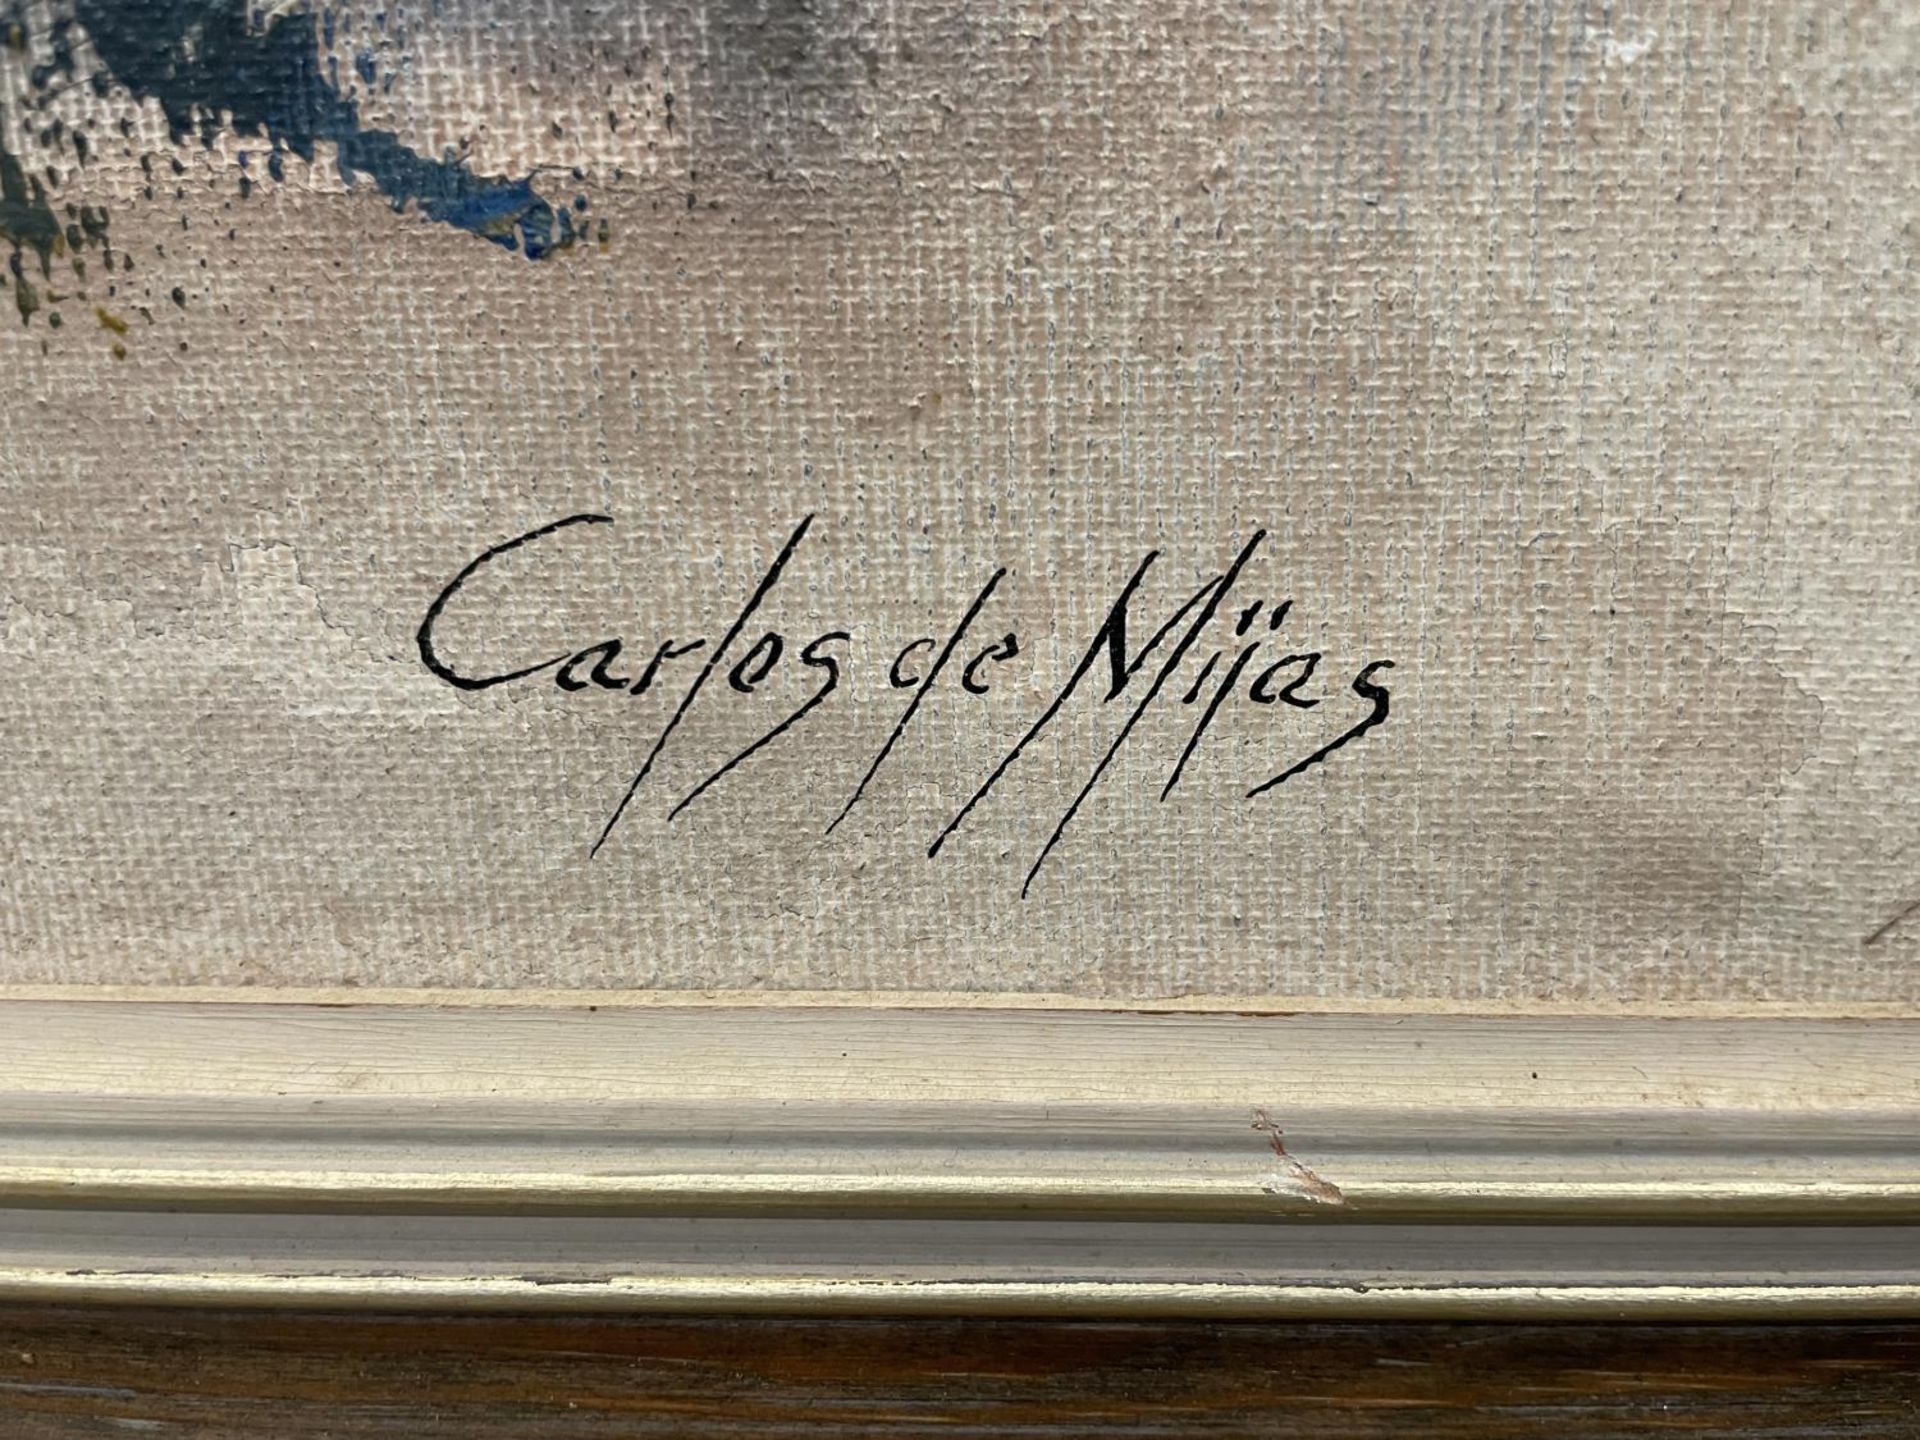 A CARLOS DE MIJAS SIGNED OIL ON CANVAS OF SHIPS - Image 2 of 2